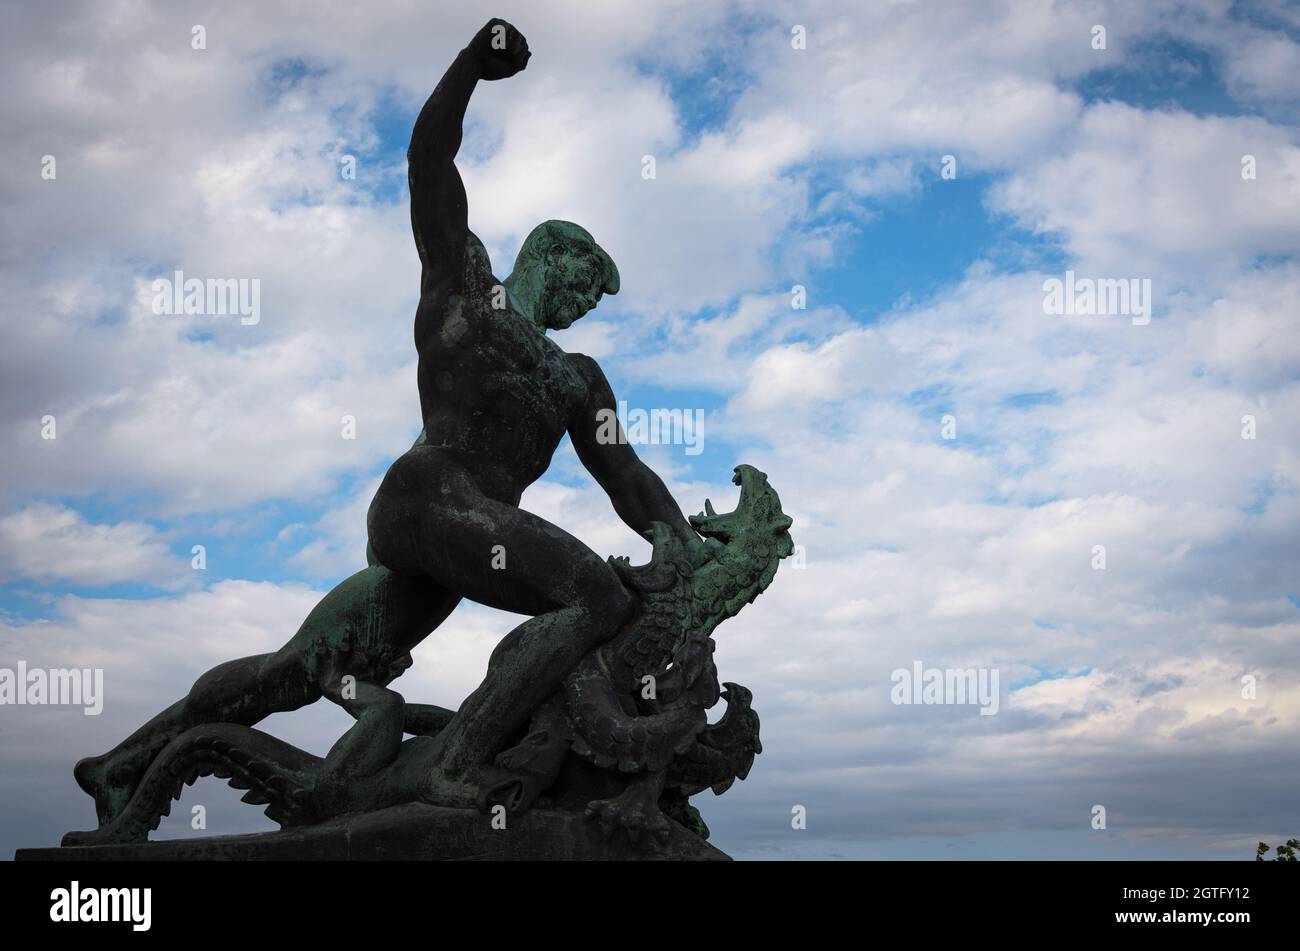 Statue of St. George slaying the dragon on Gellert Hill, at the base of the Liberty Monument, Citadel, Budapest, Hungary Stock Photo